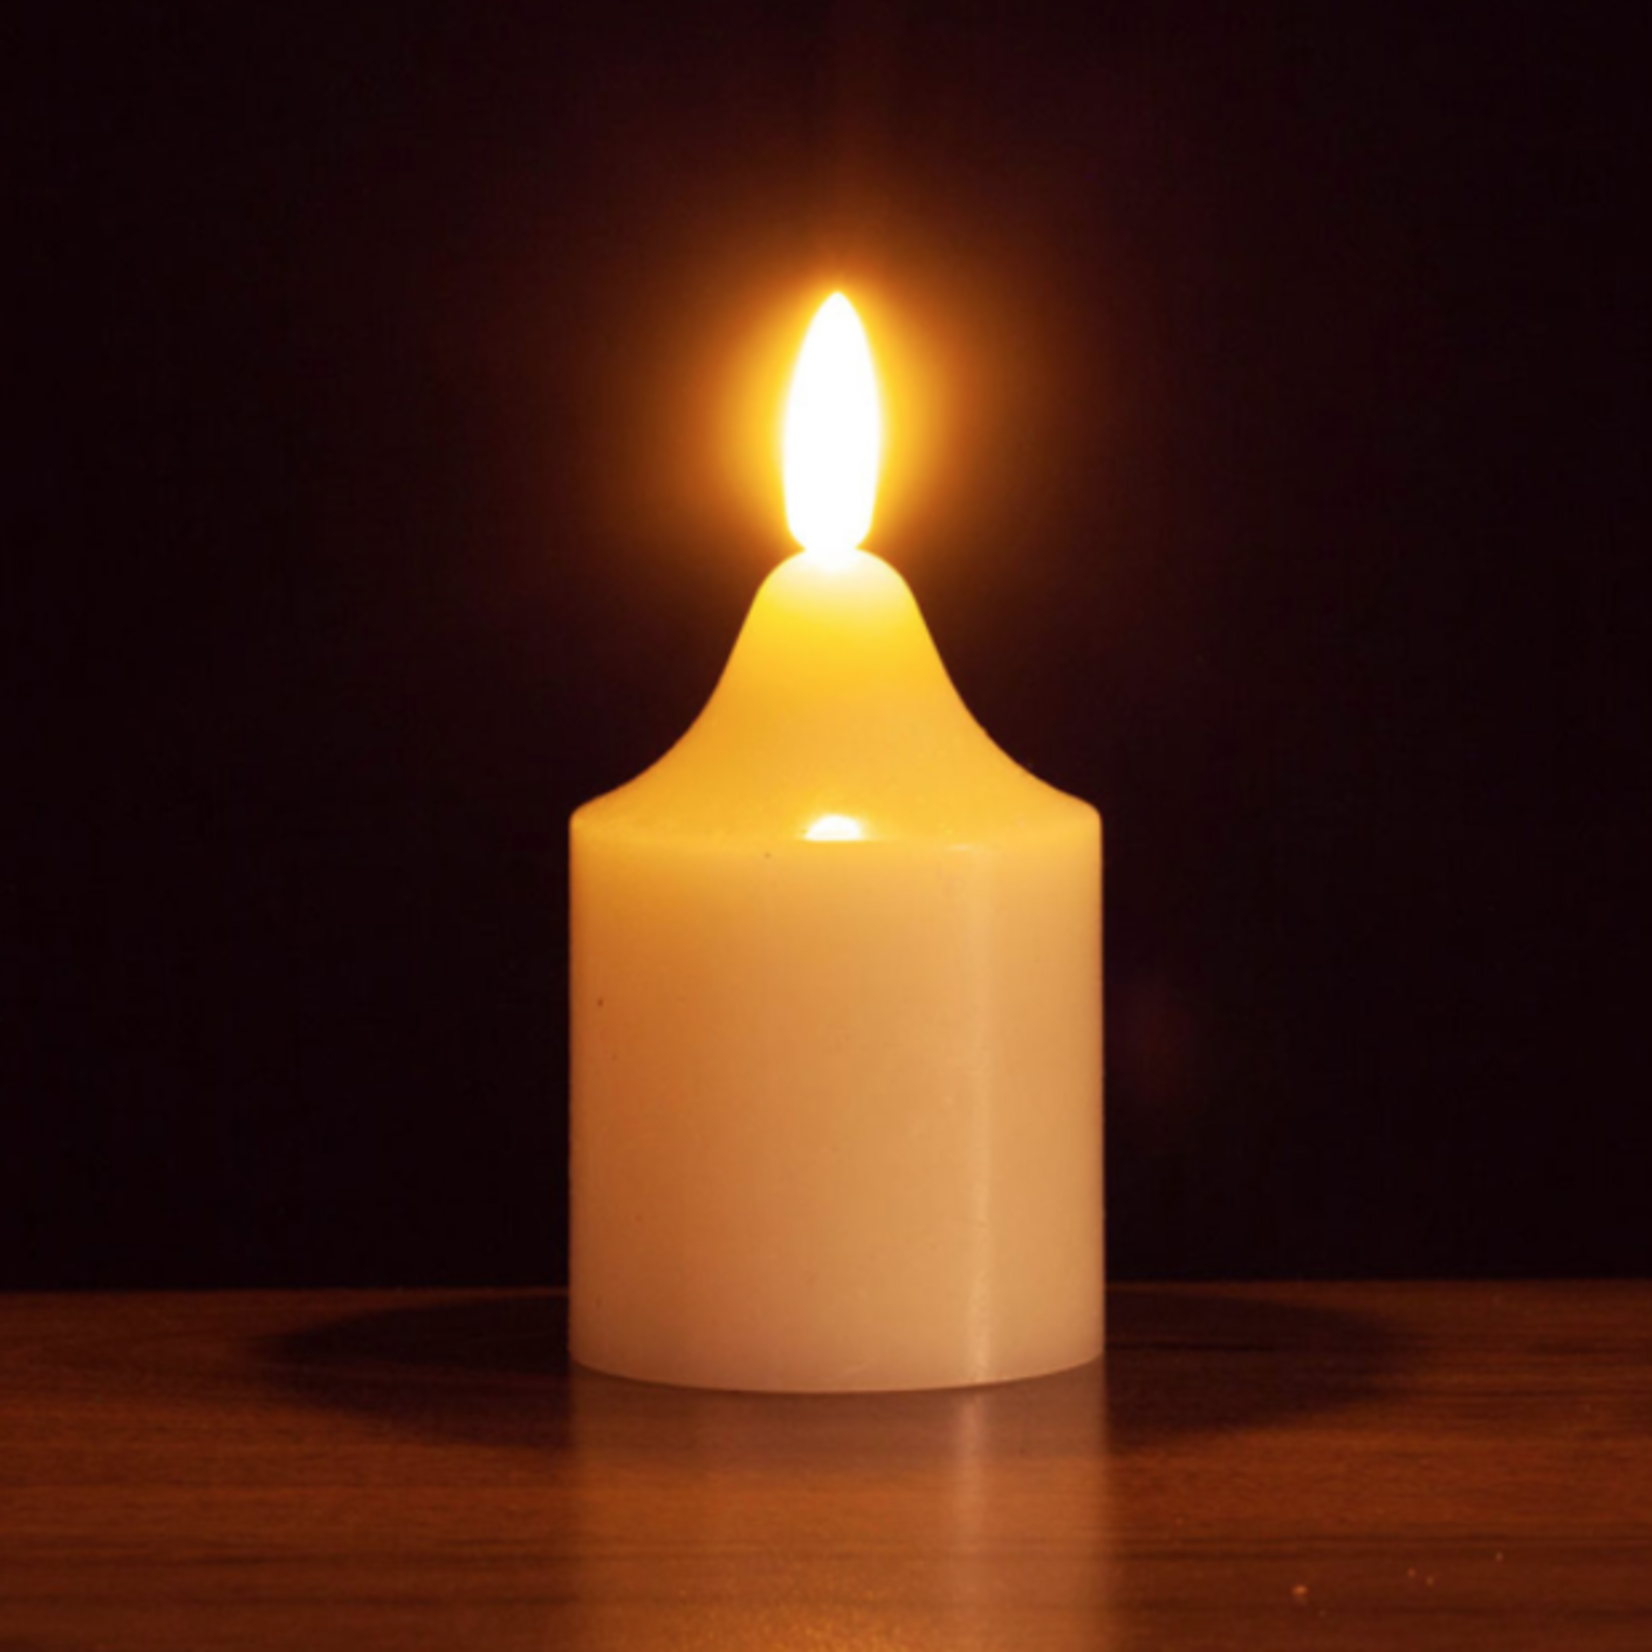 4”H X 2”D LED WAX FLICKERING IVORY CANDLE